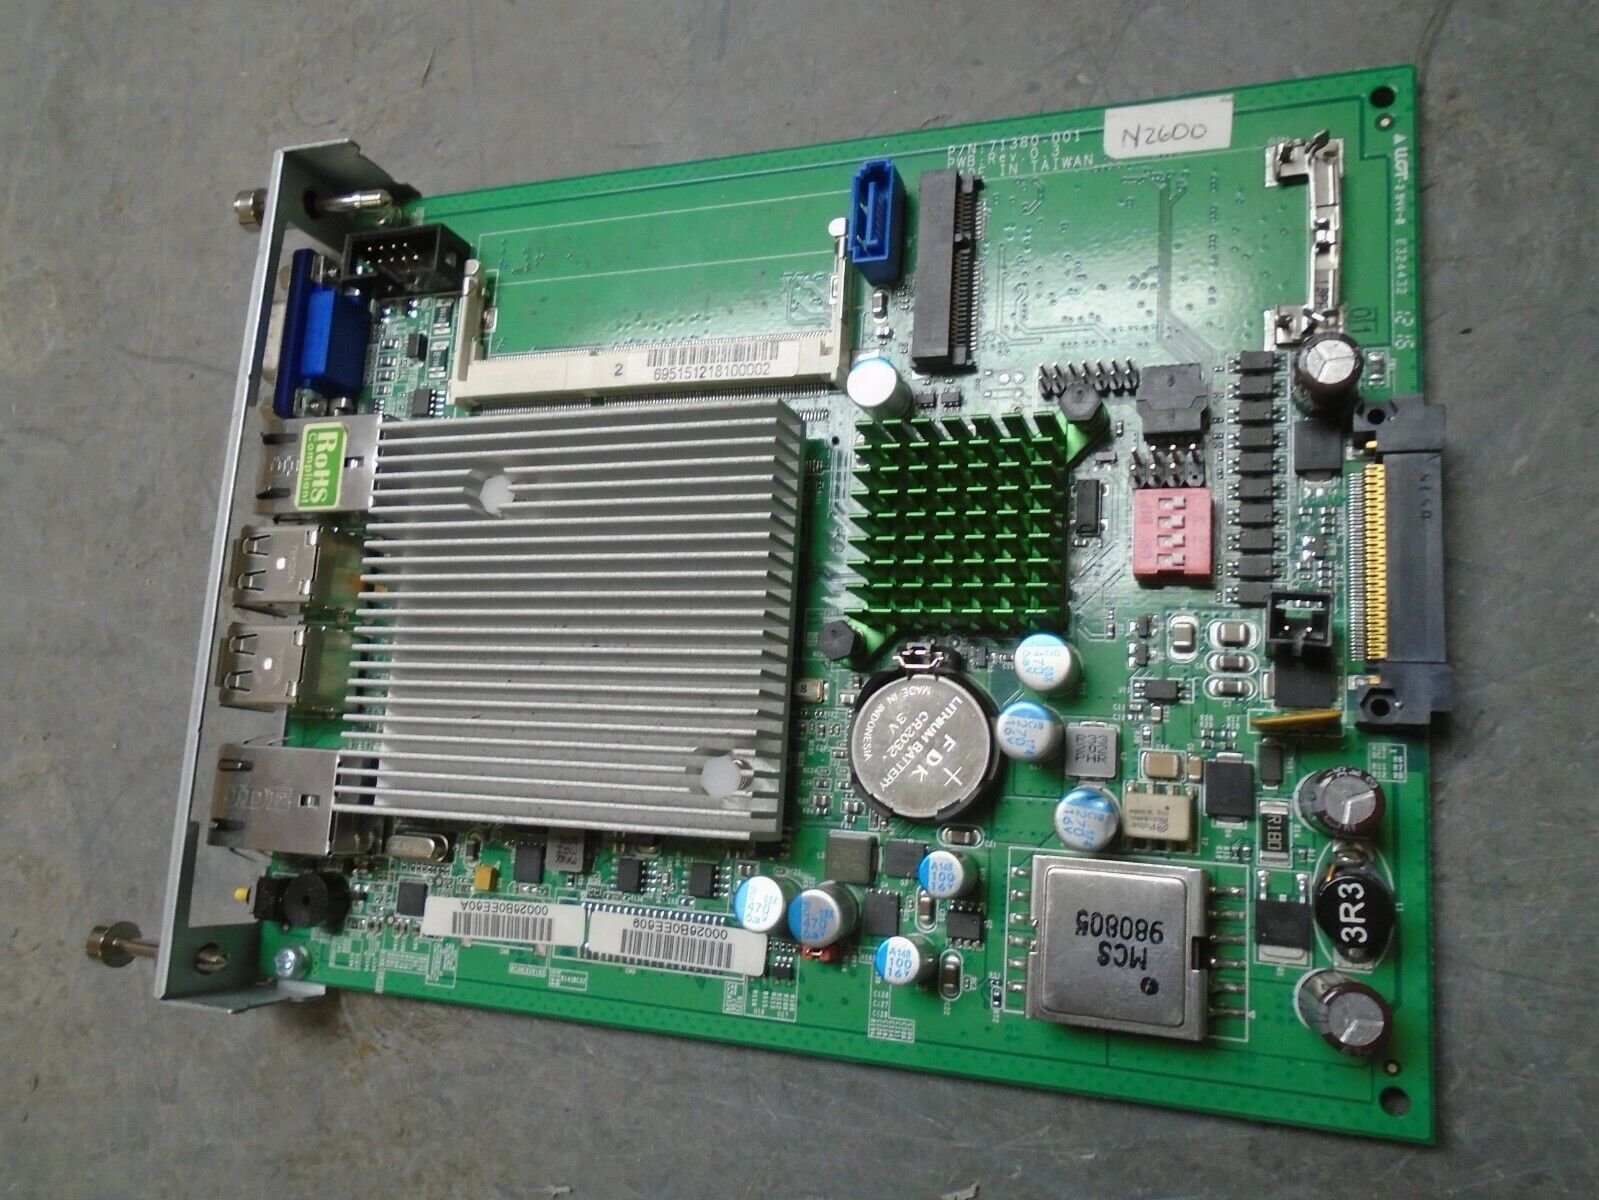 NEC GCD-IN SERVER II Card no ram or hard drive, missing face plate